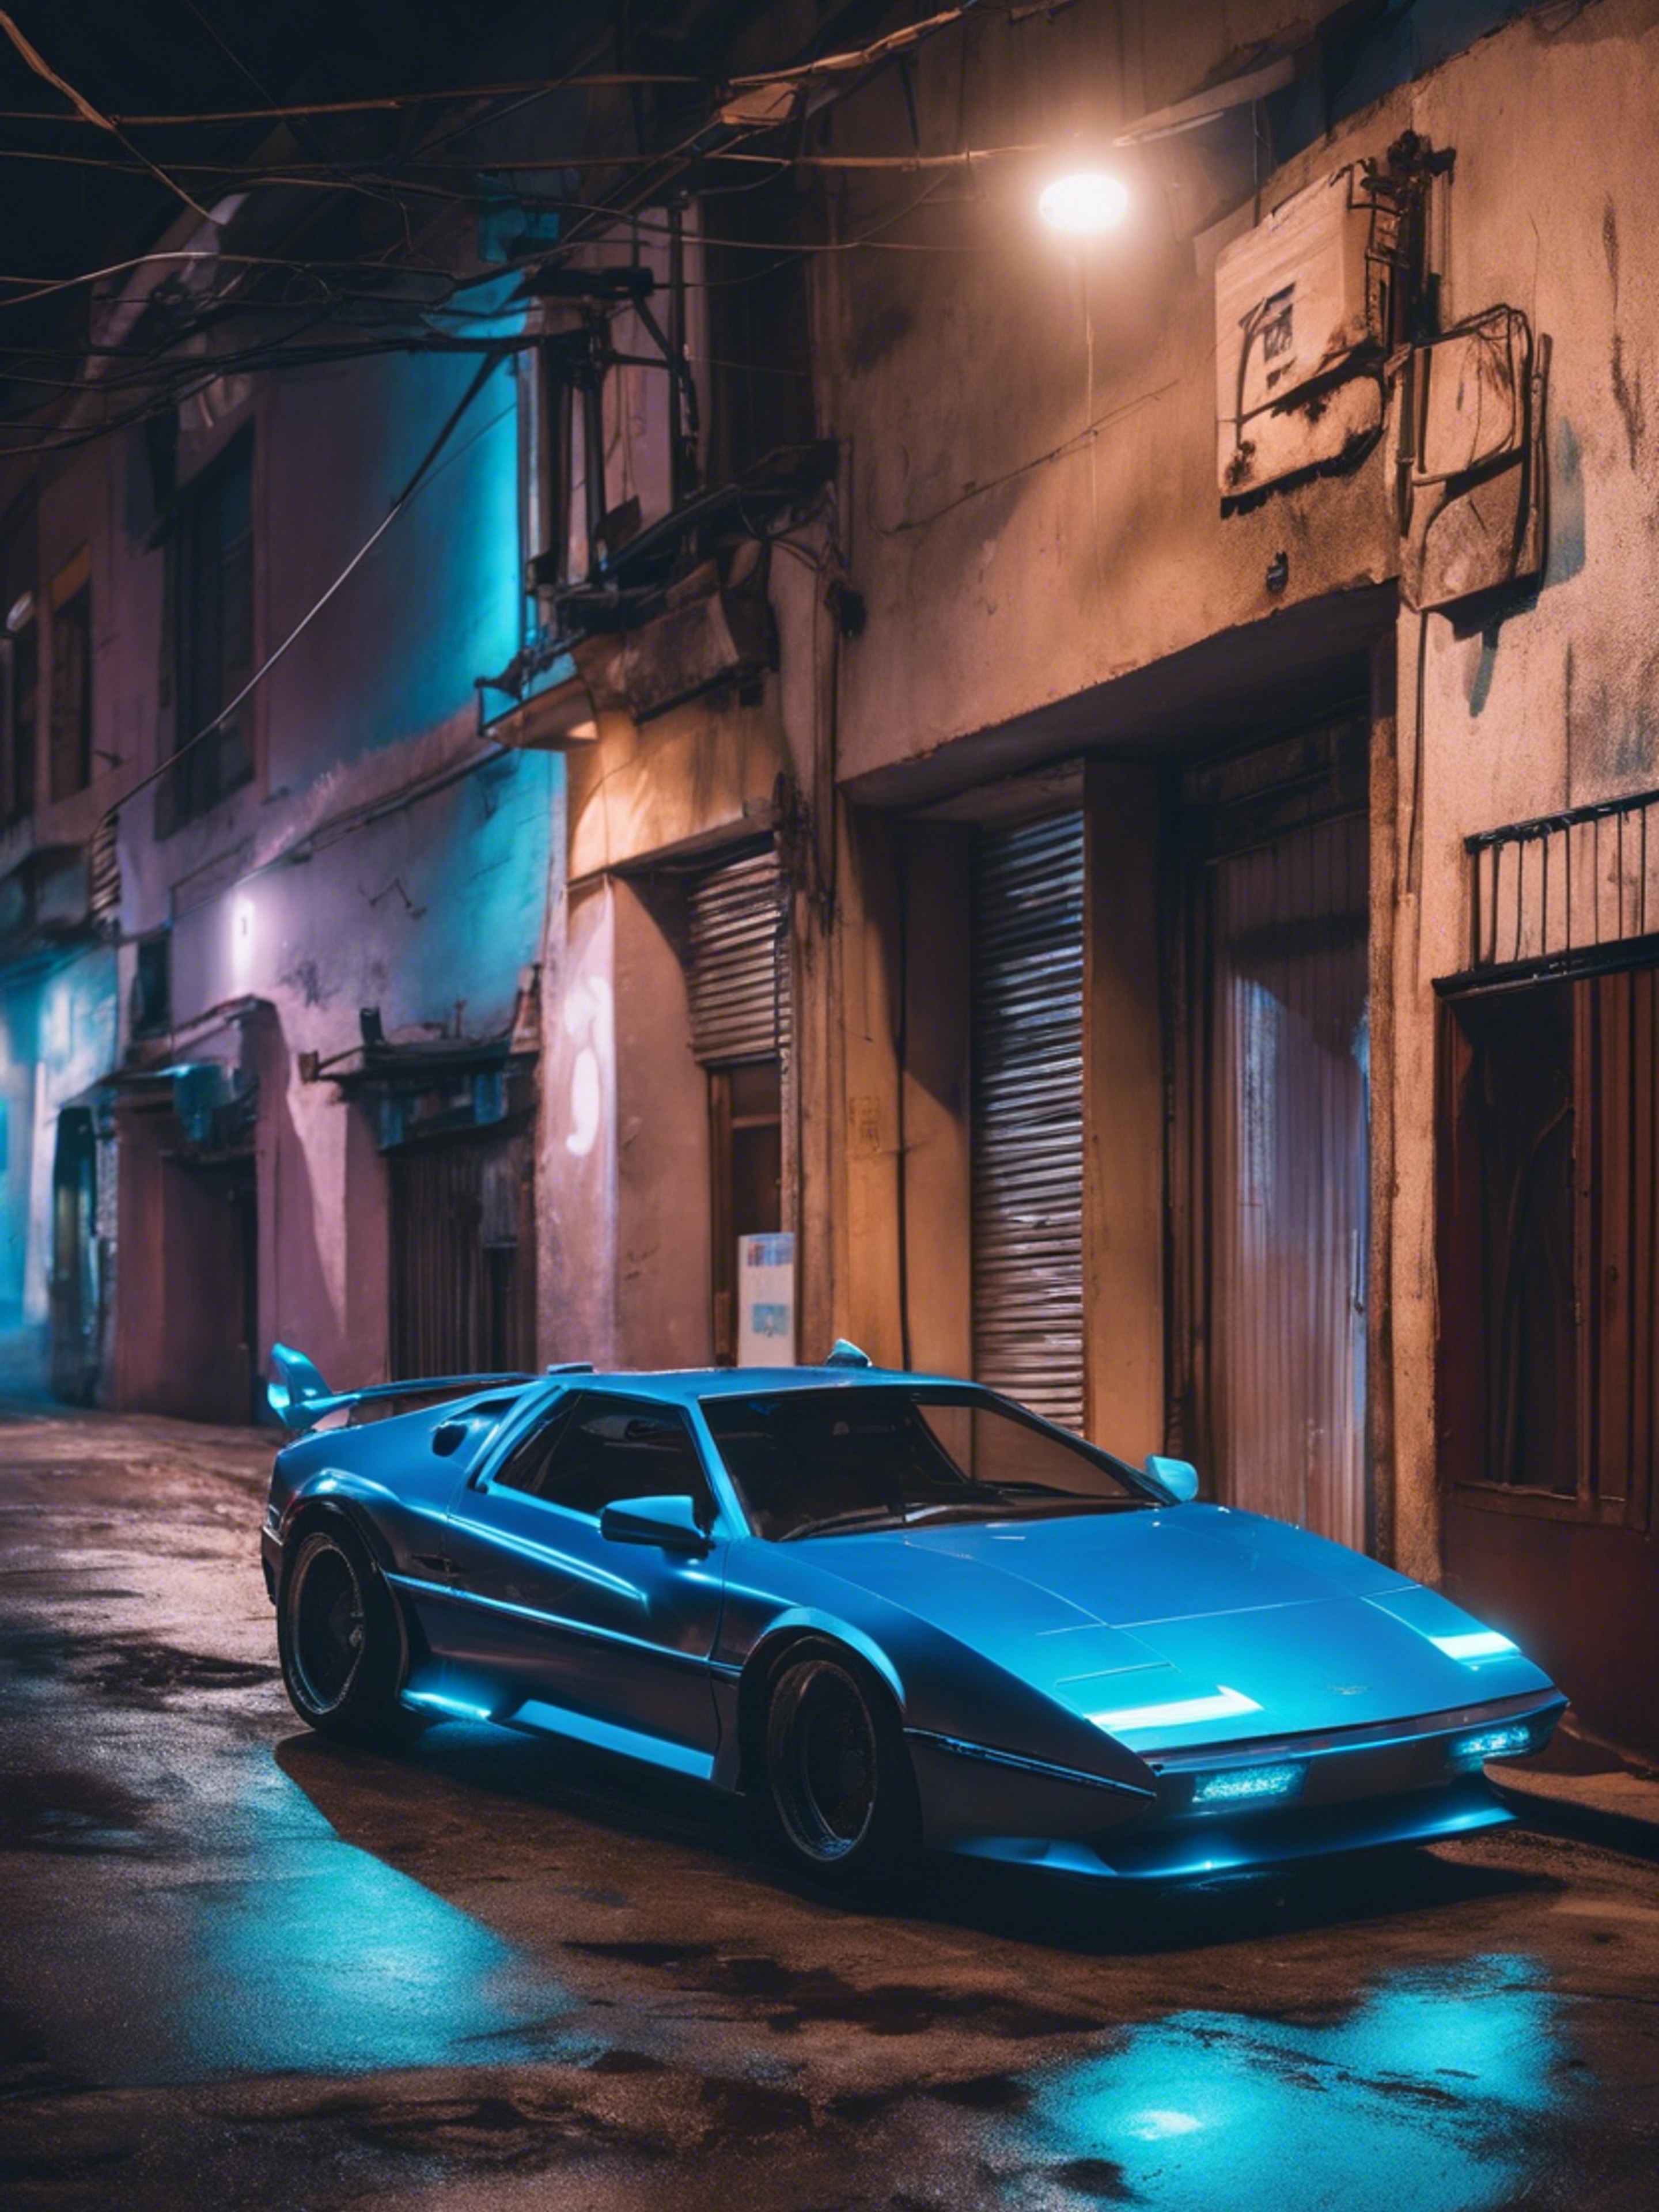 A cyberpunk themed sports car glowing with neon blue underlights parked in a dim alley. Tapeta[b442527eec5a4d00a6f1]